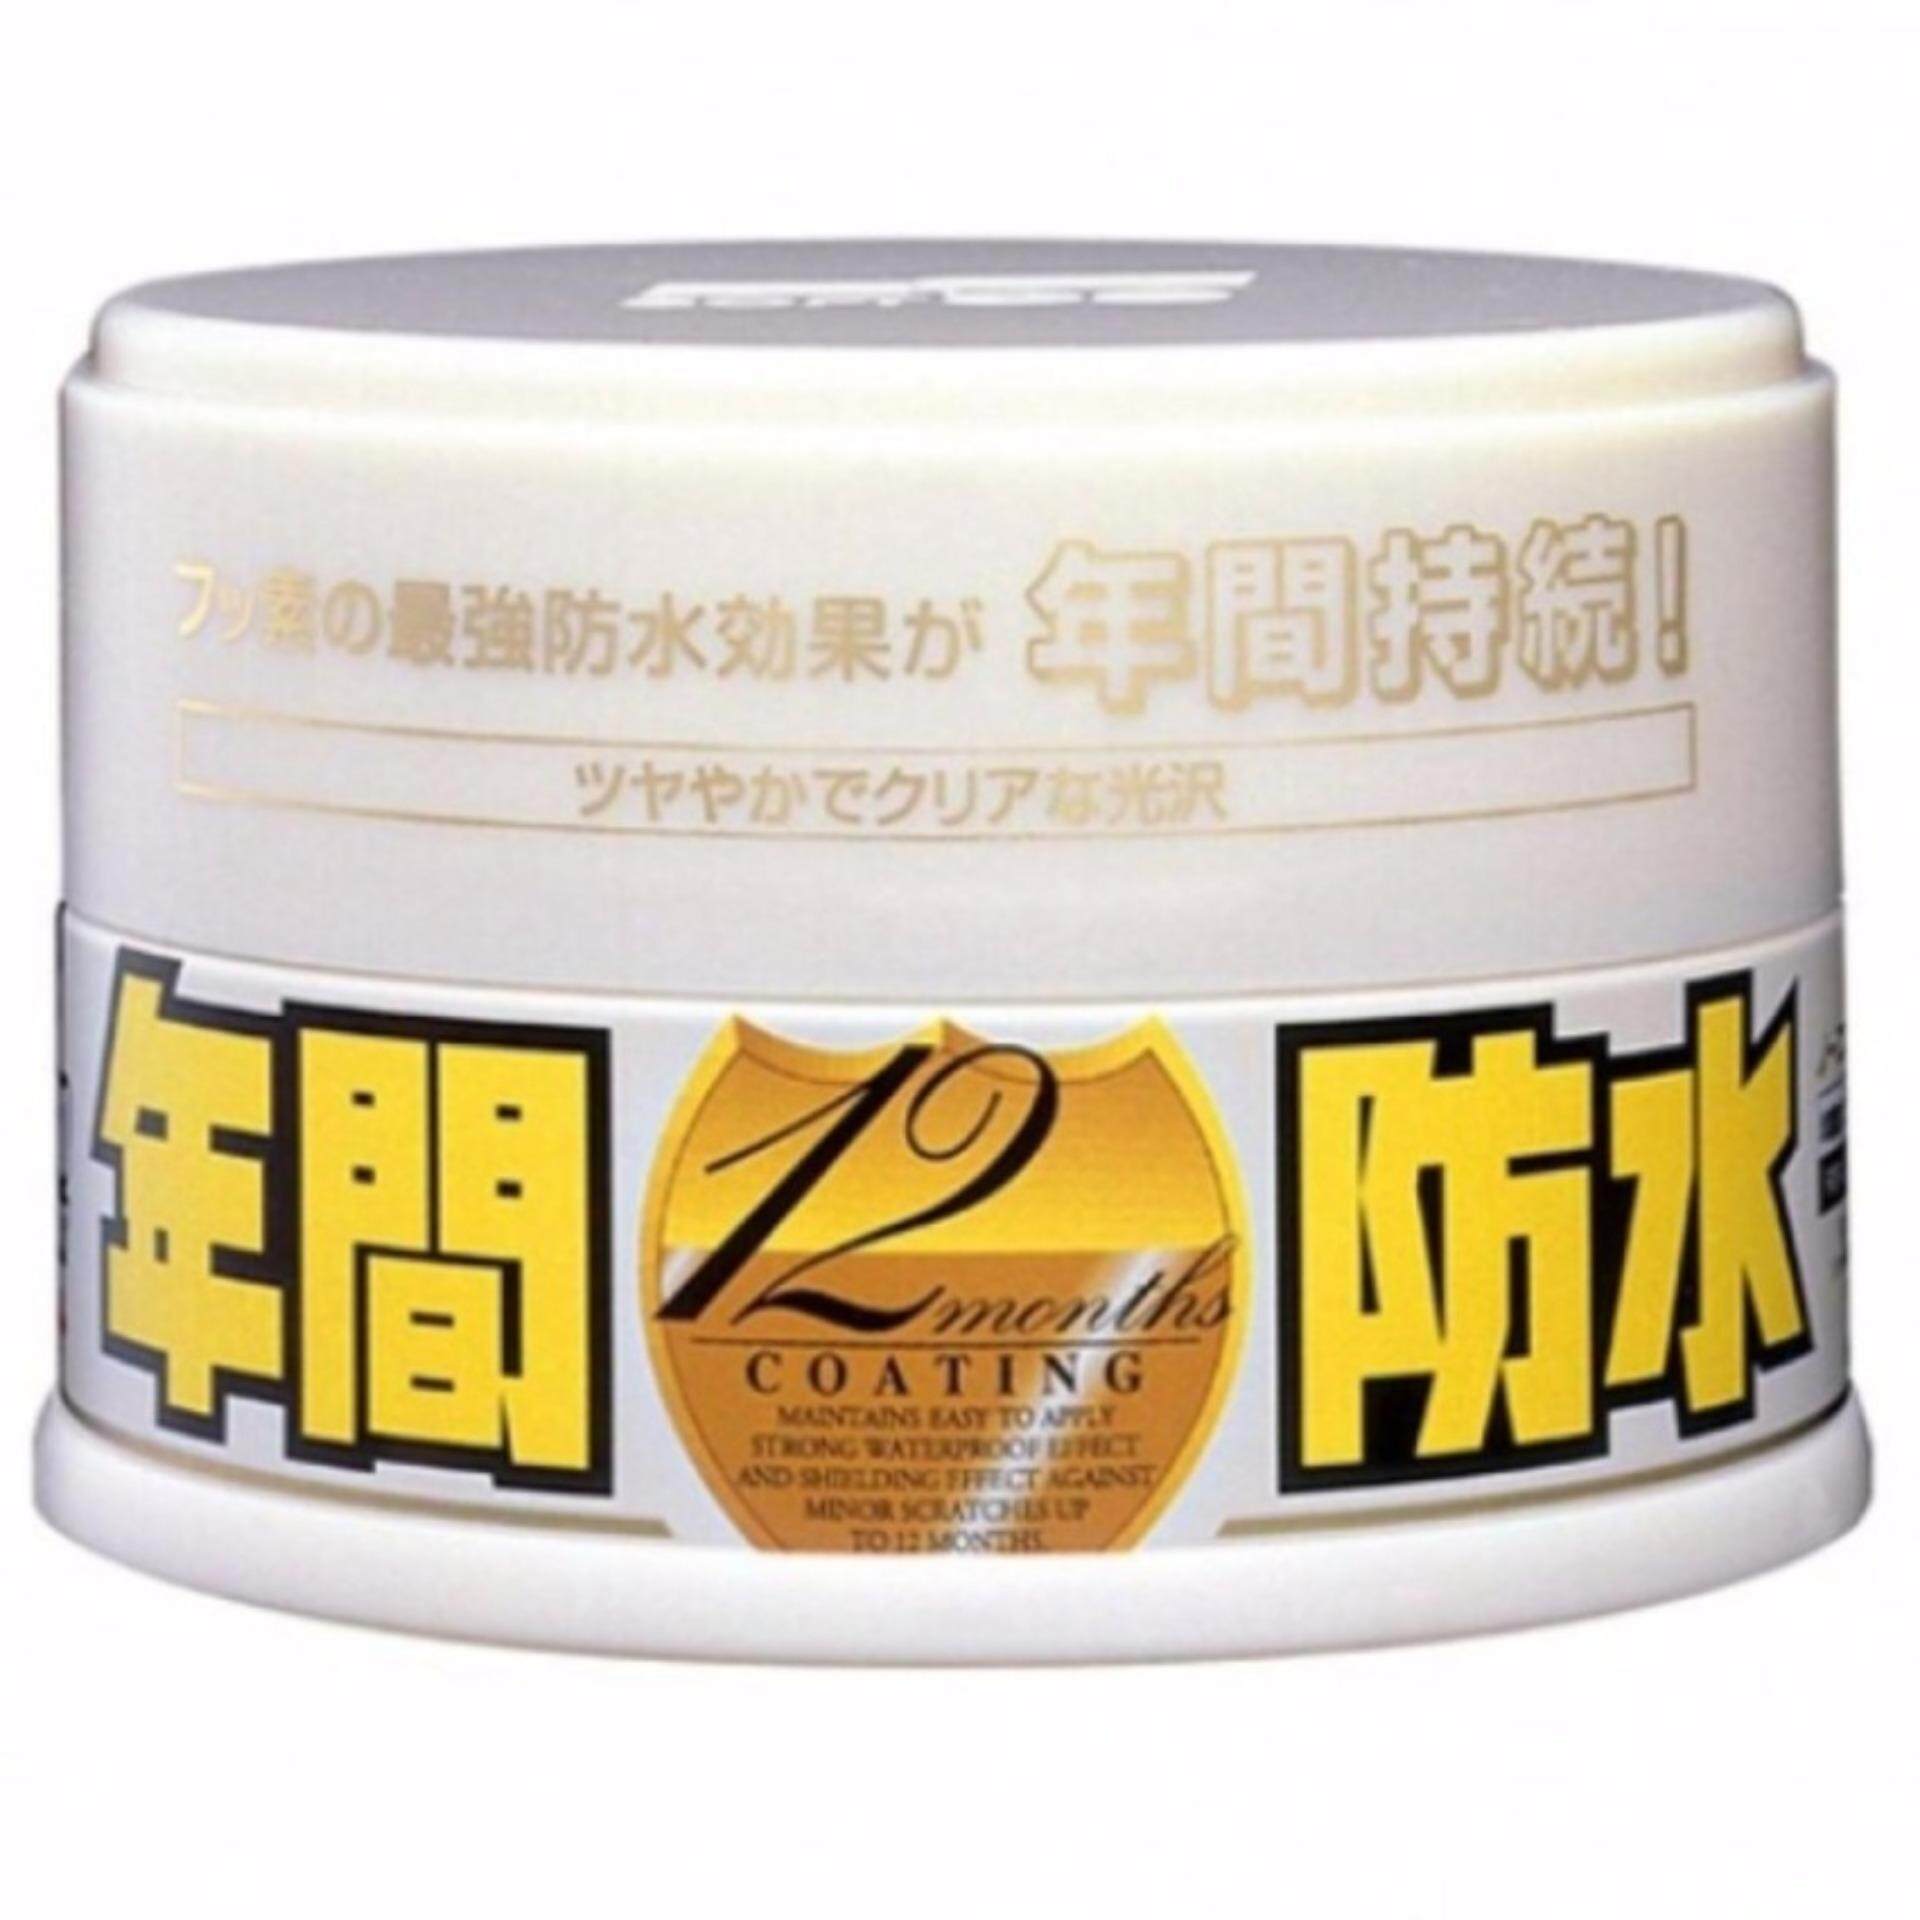 ( Free Gift ) Soft 99 / Soft99 Fusso Coat 12 Months Light Color Wax 200g With DIY Car Polish Machine Polisher